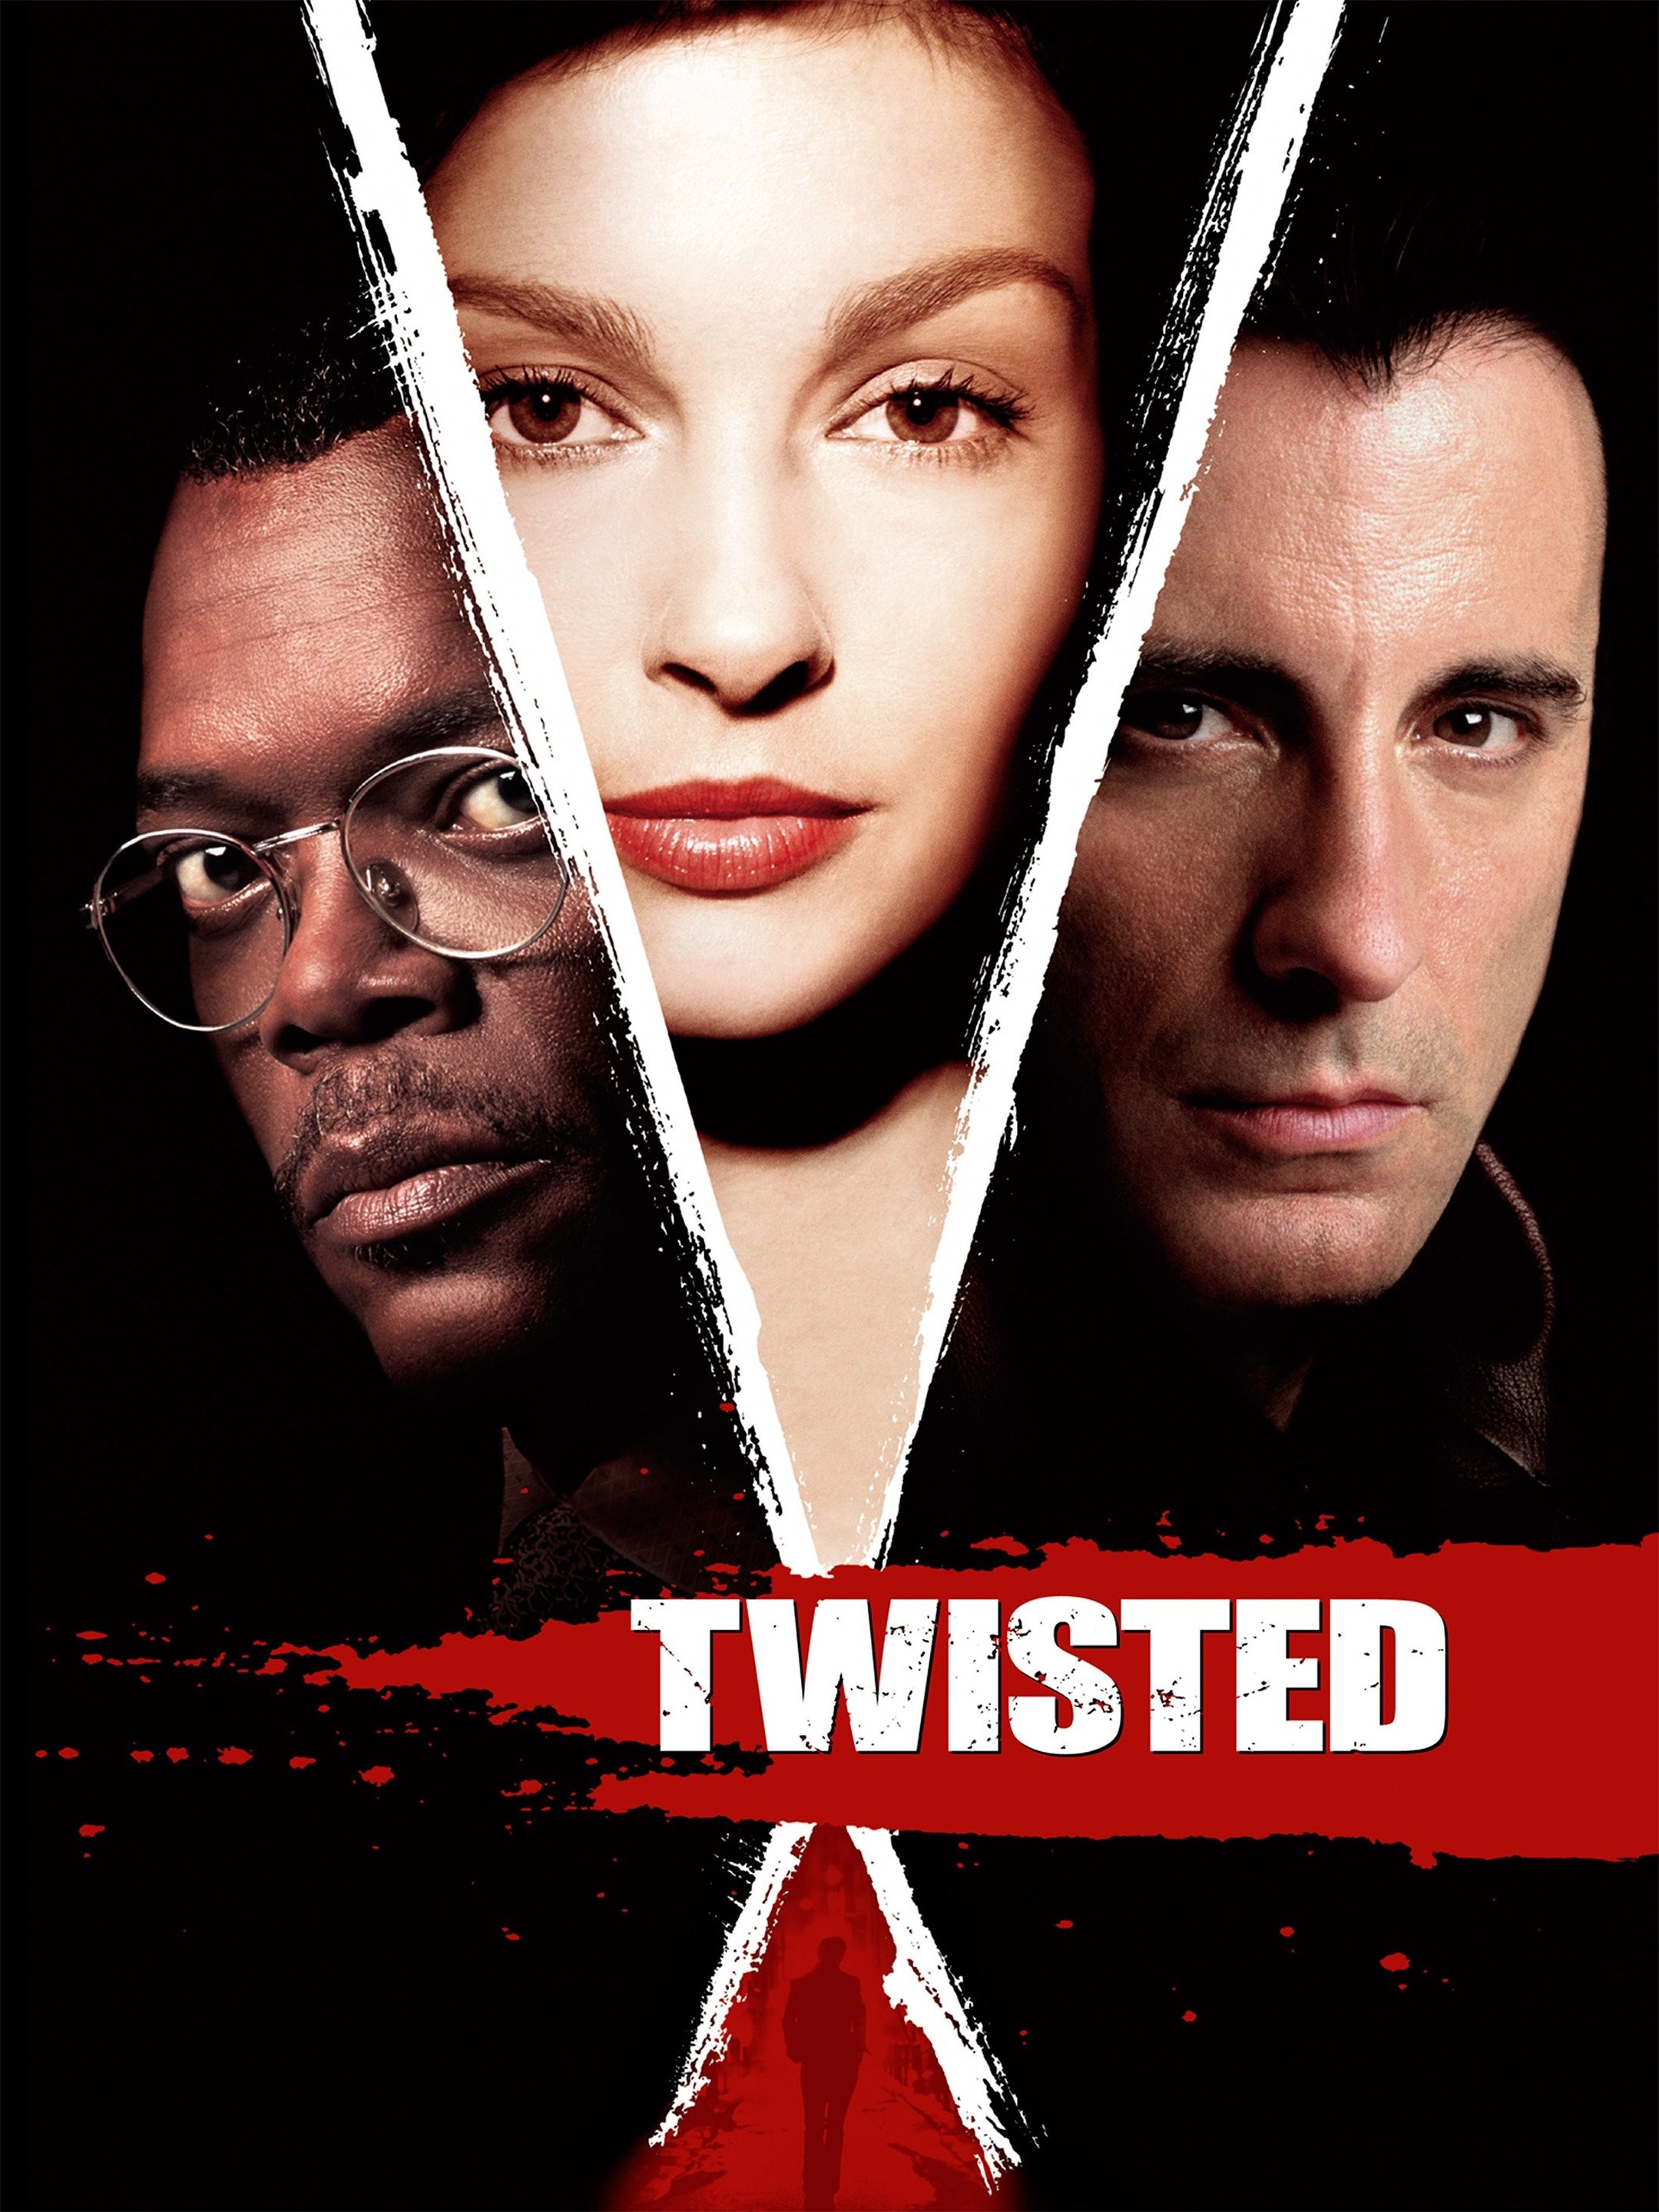 Twisted Love  Rotten Tomatoes